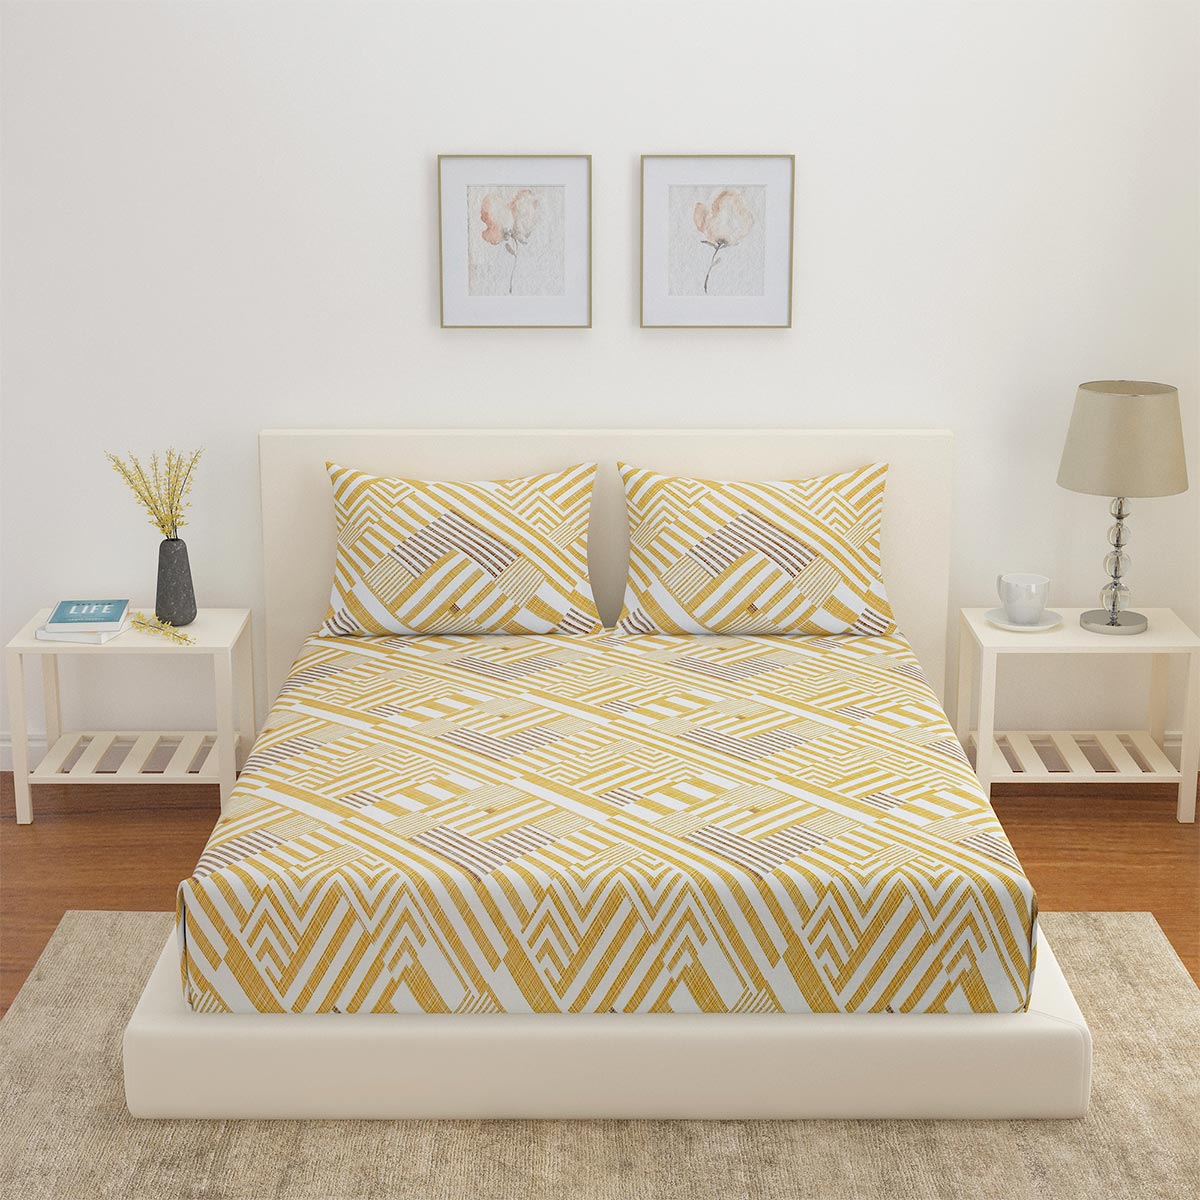 Arias by Lara Dutta Geometric Cotton King Bedsheet With 2 Pillow Covers (Yellow)